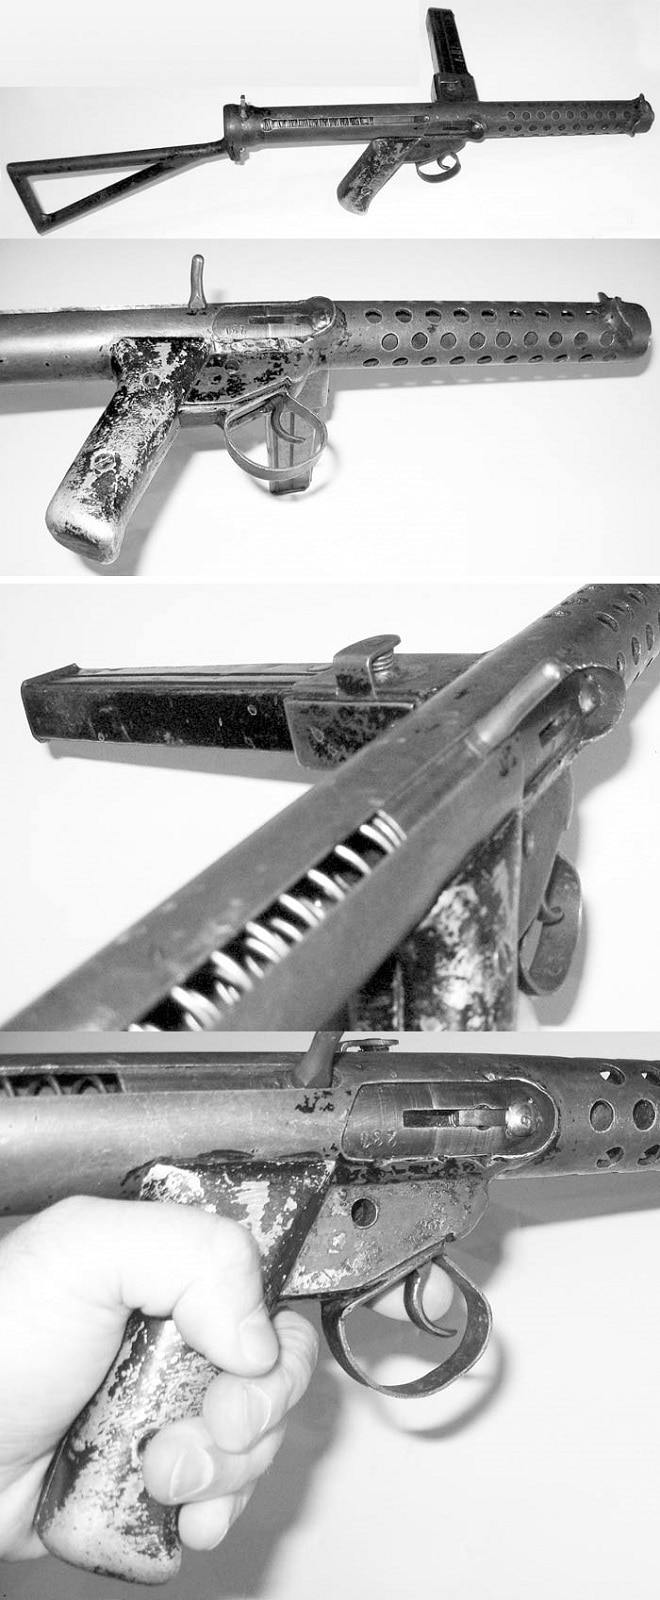 17 Homemade guns you have to see to believe (PHOTOS)